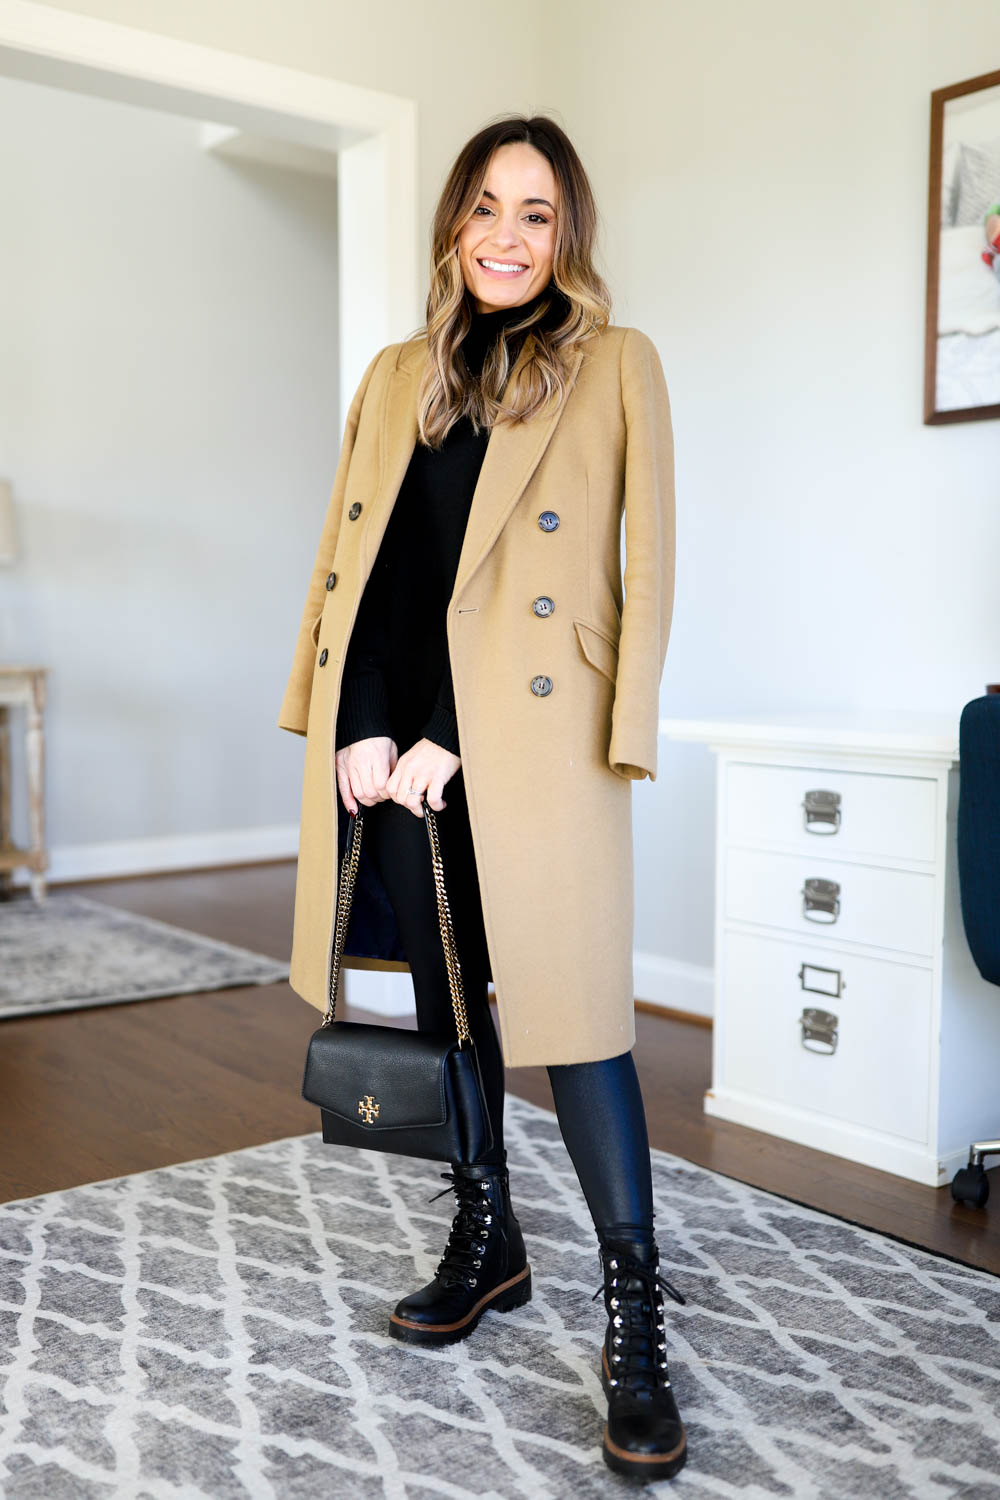 Outfits to Wear with Combat Boots This Fall